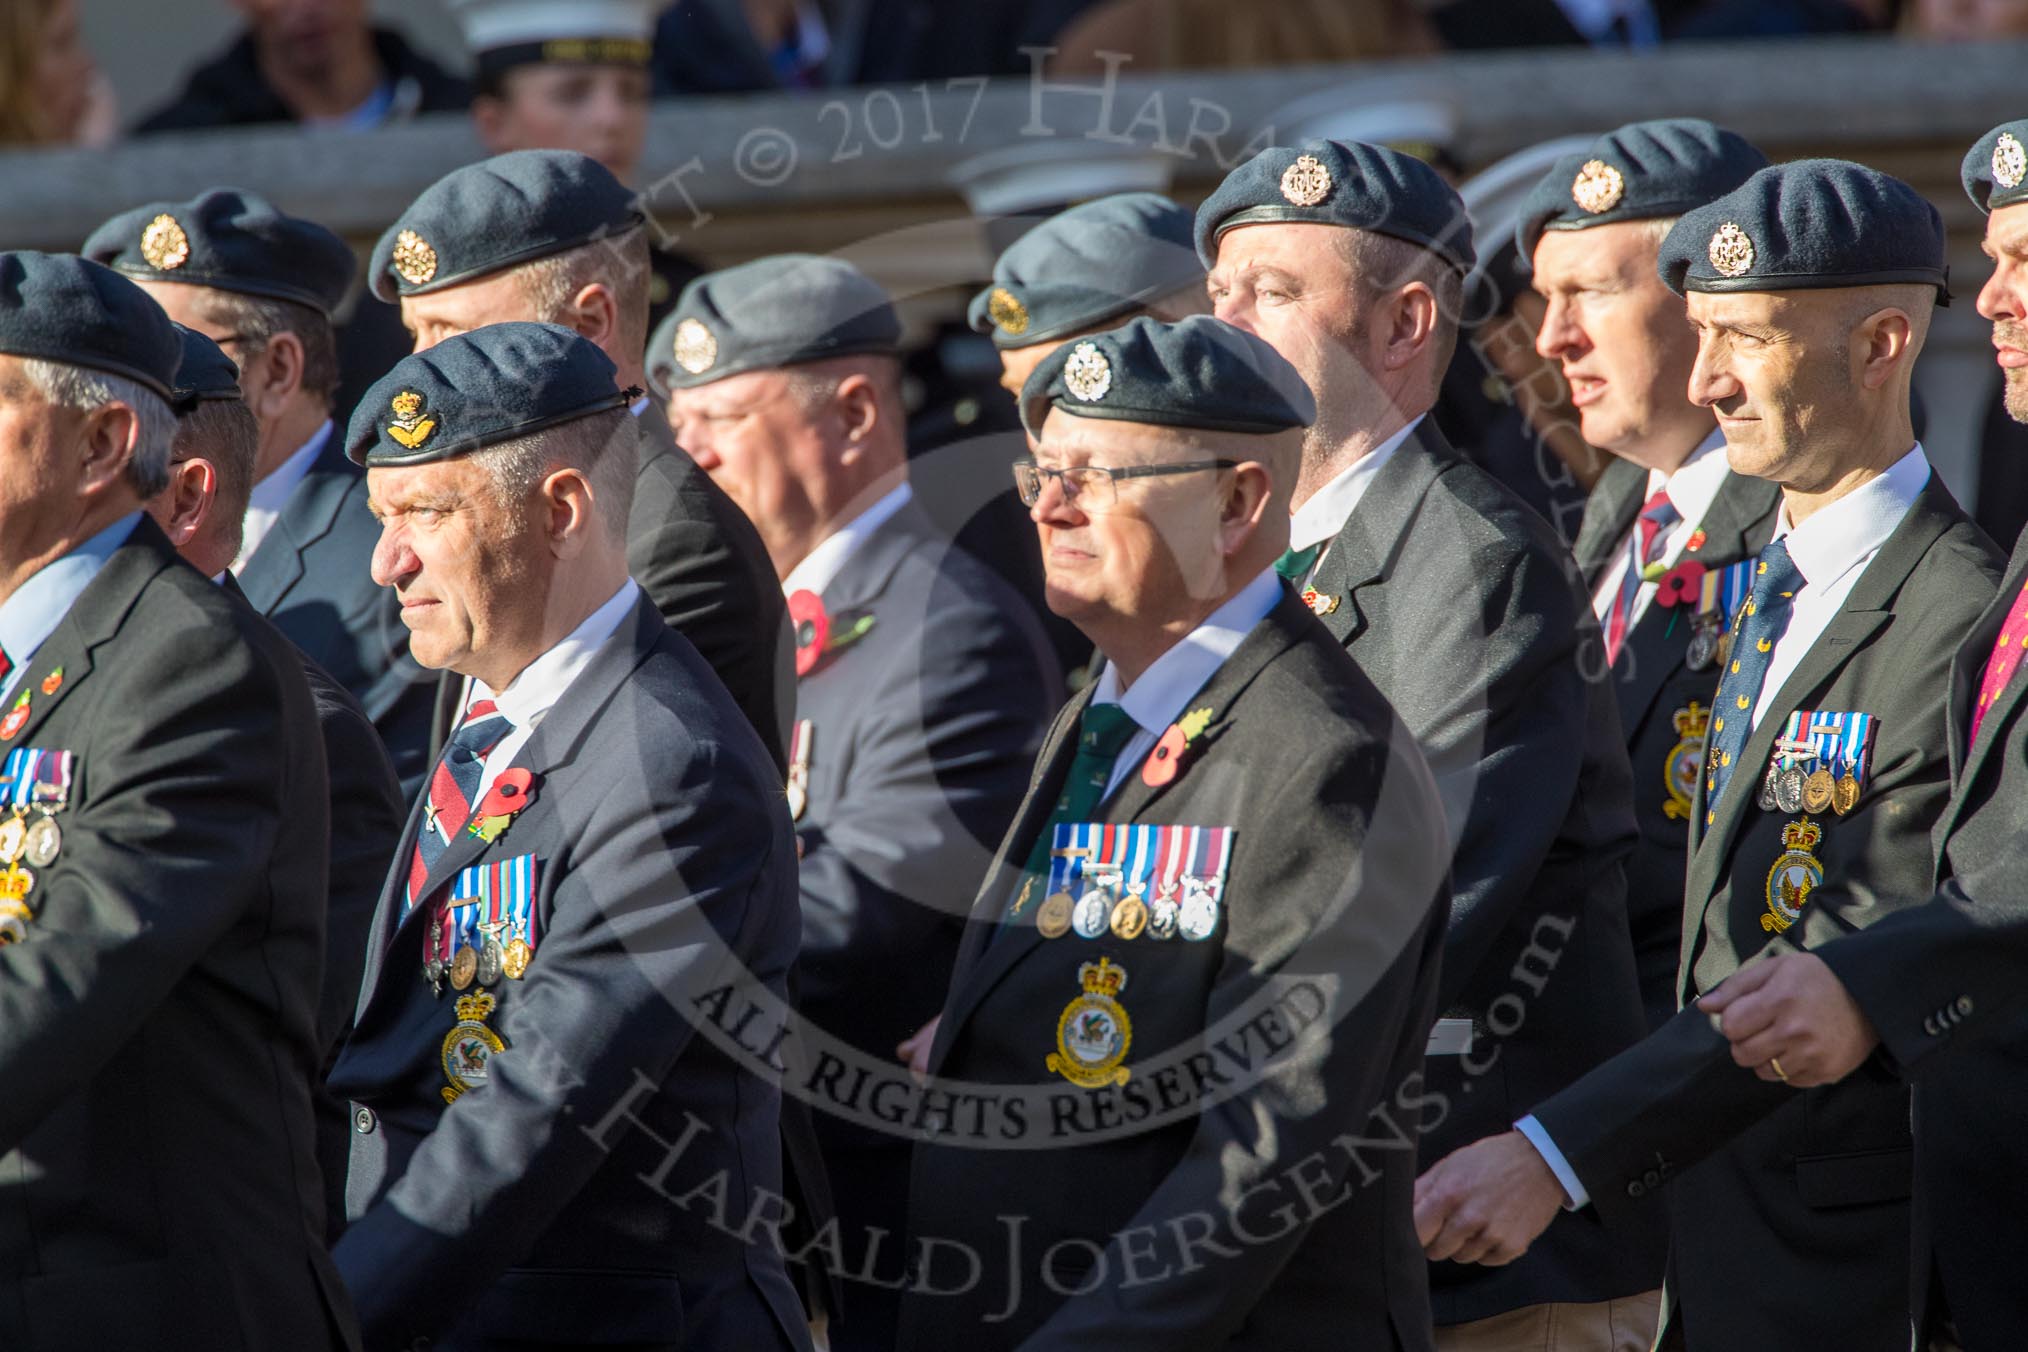 Harrier Force Association (Group C25, 100 members) during the Royal British Legion March Past on Remembrance Sunday at the Cenotaph, Whitehall, Westminster, London, 11 November 2018, 12:18.